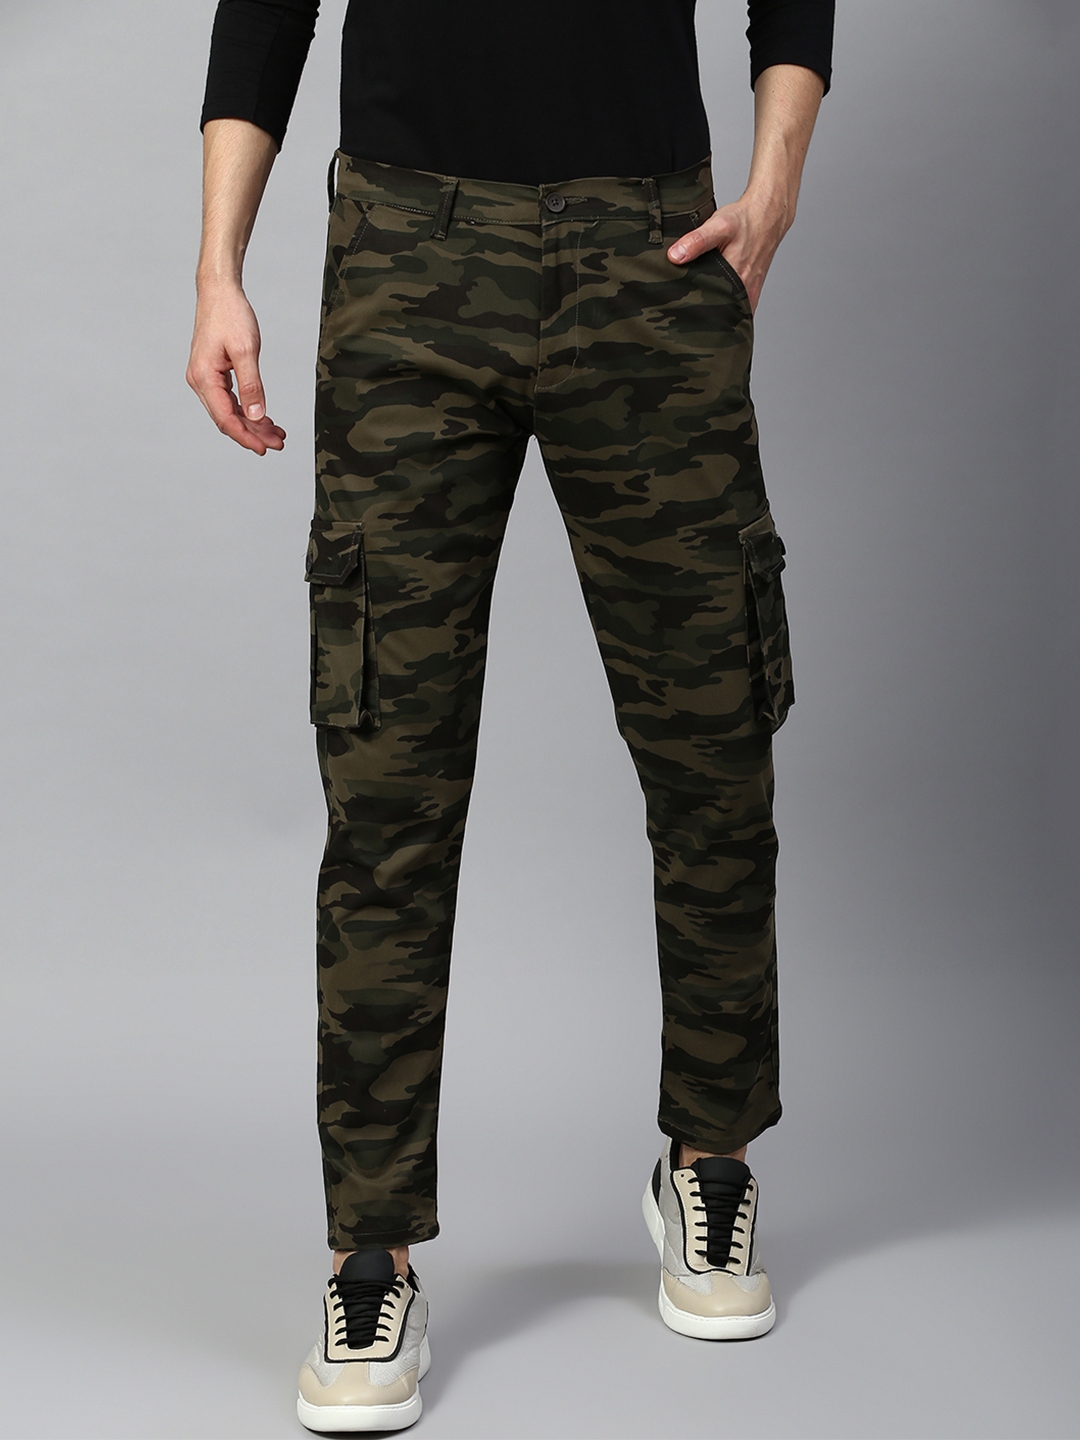 Buy Dennis Lingo Men Cotton Camouflage Printed Tapered Fit Cargos ...